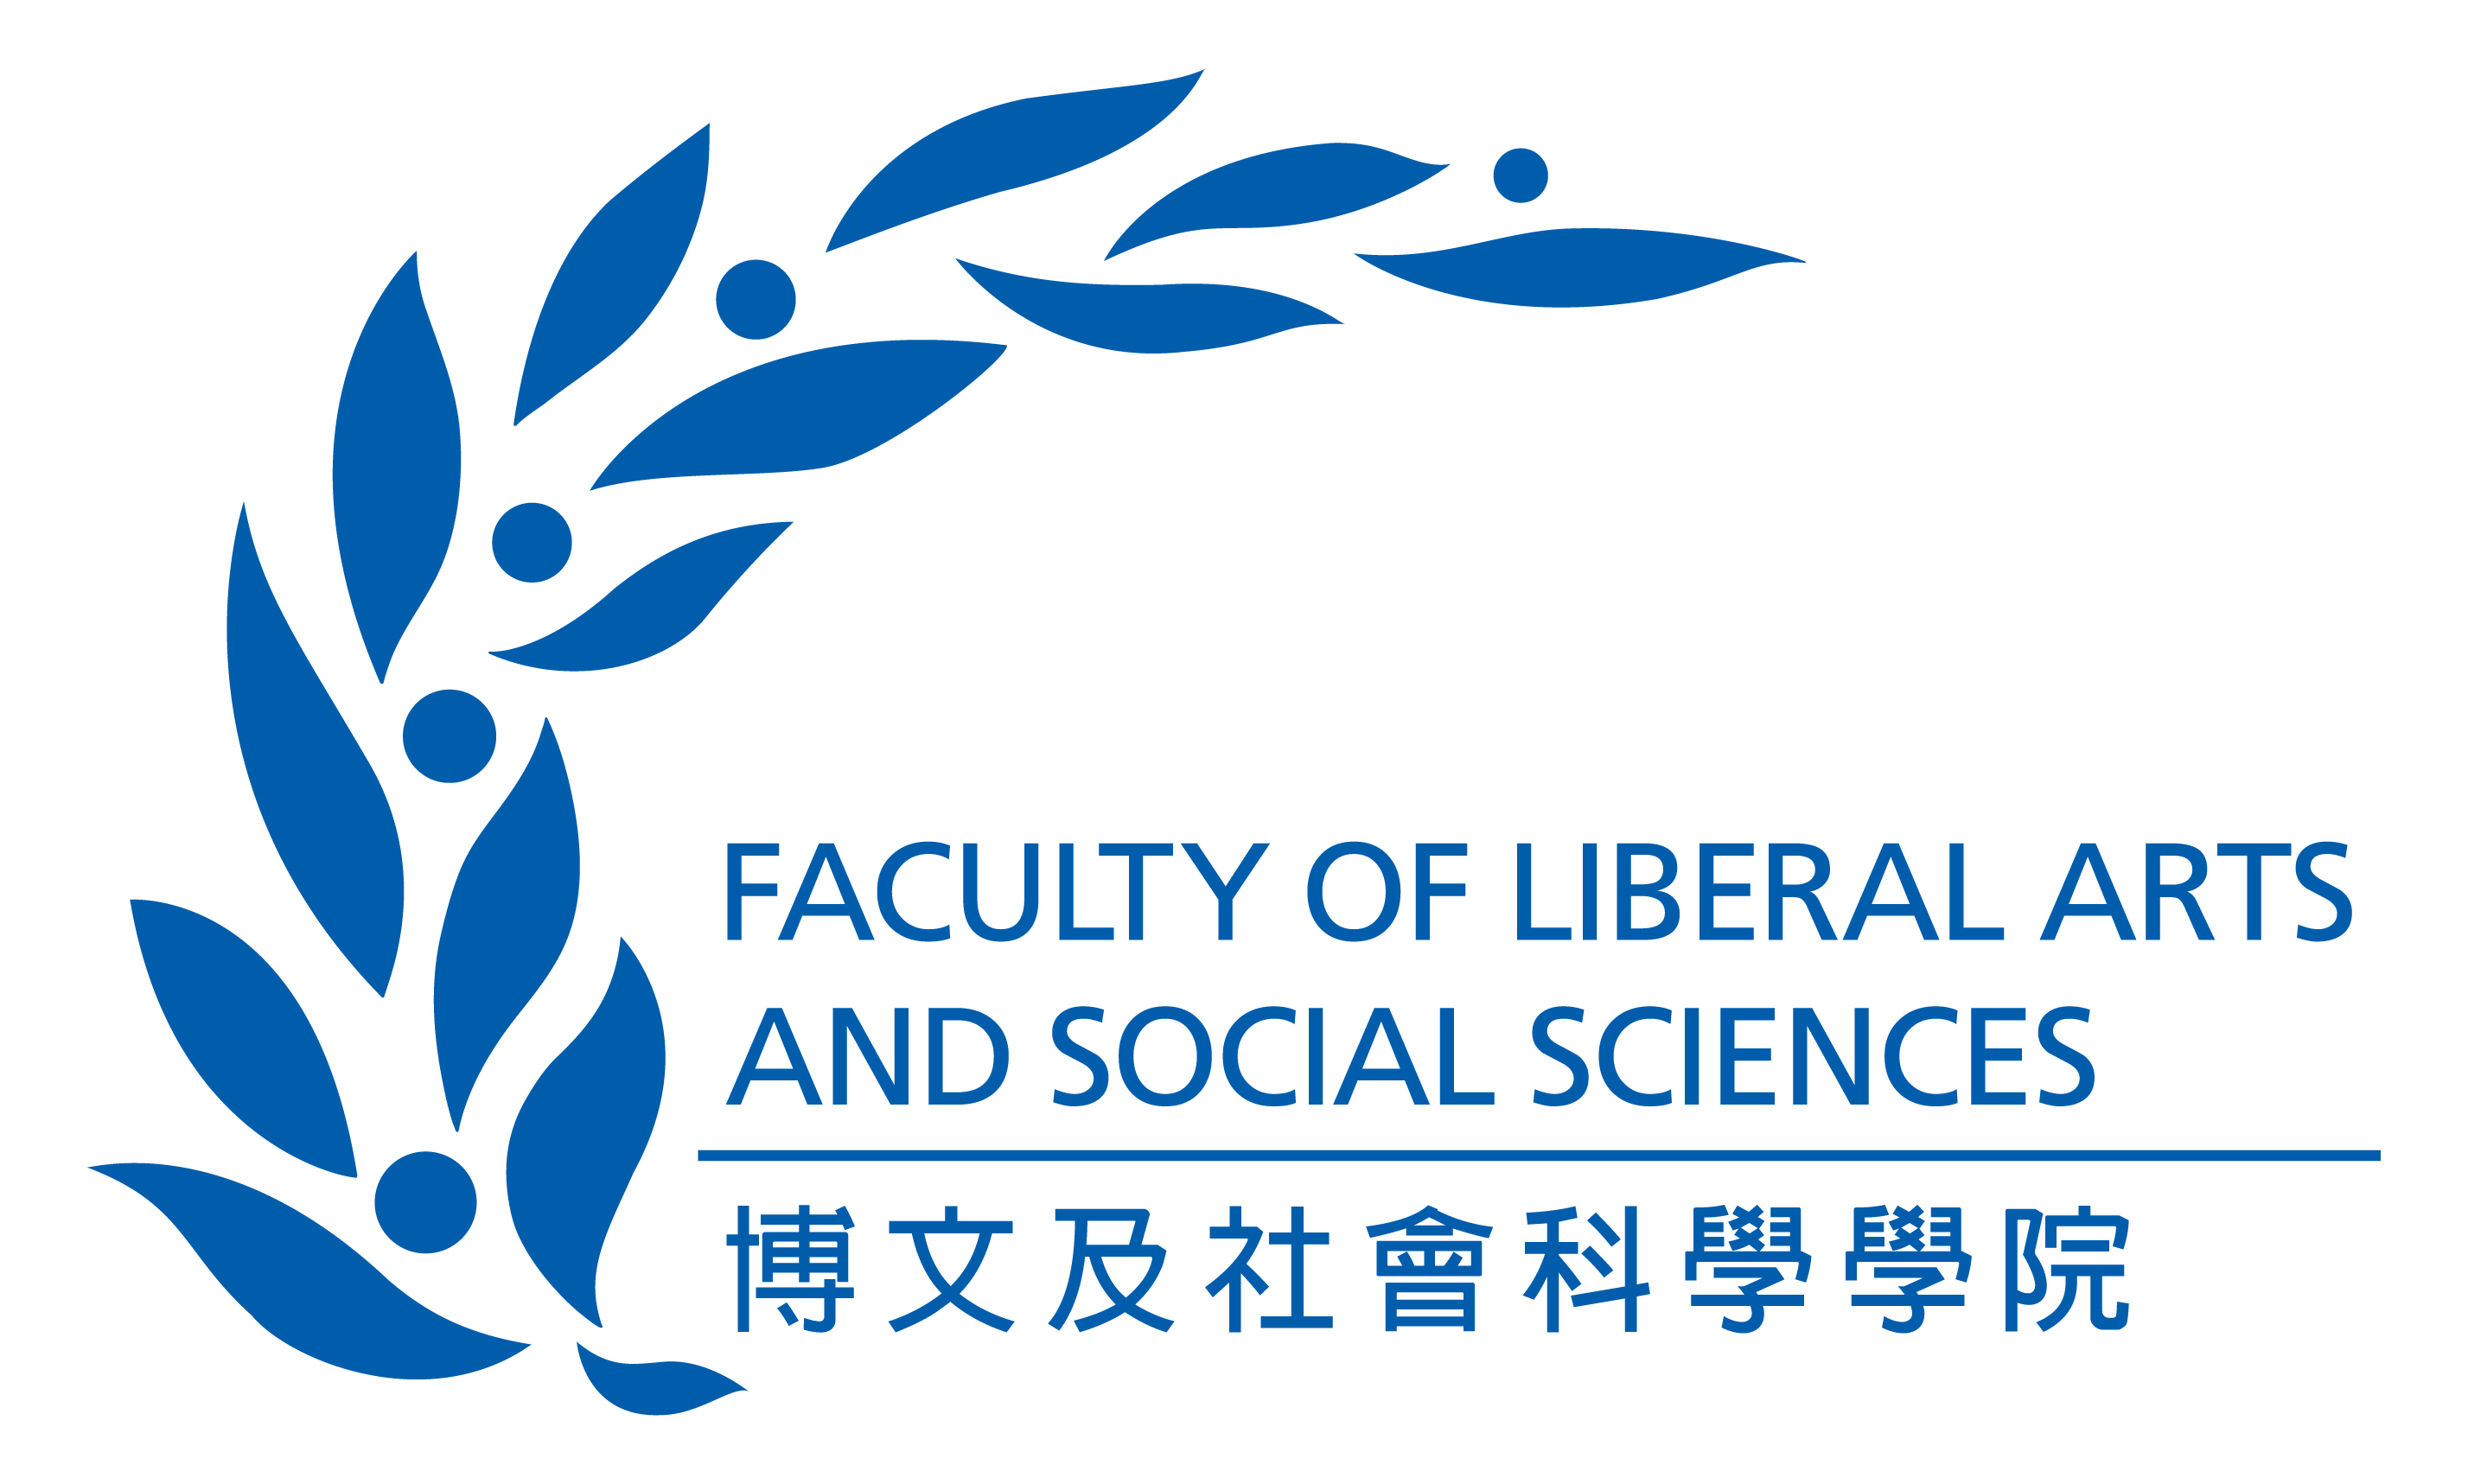 Faculty of Liberal Arts and Social Sciences